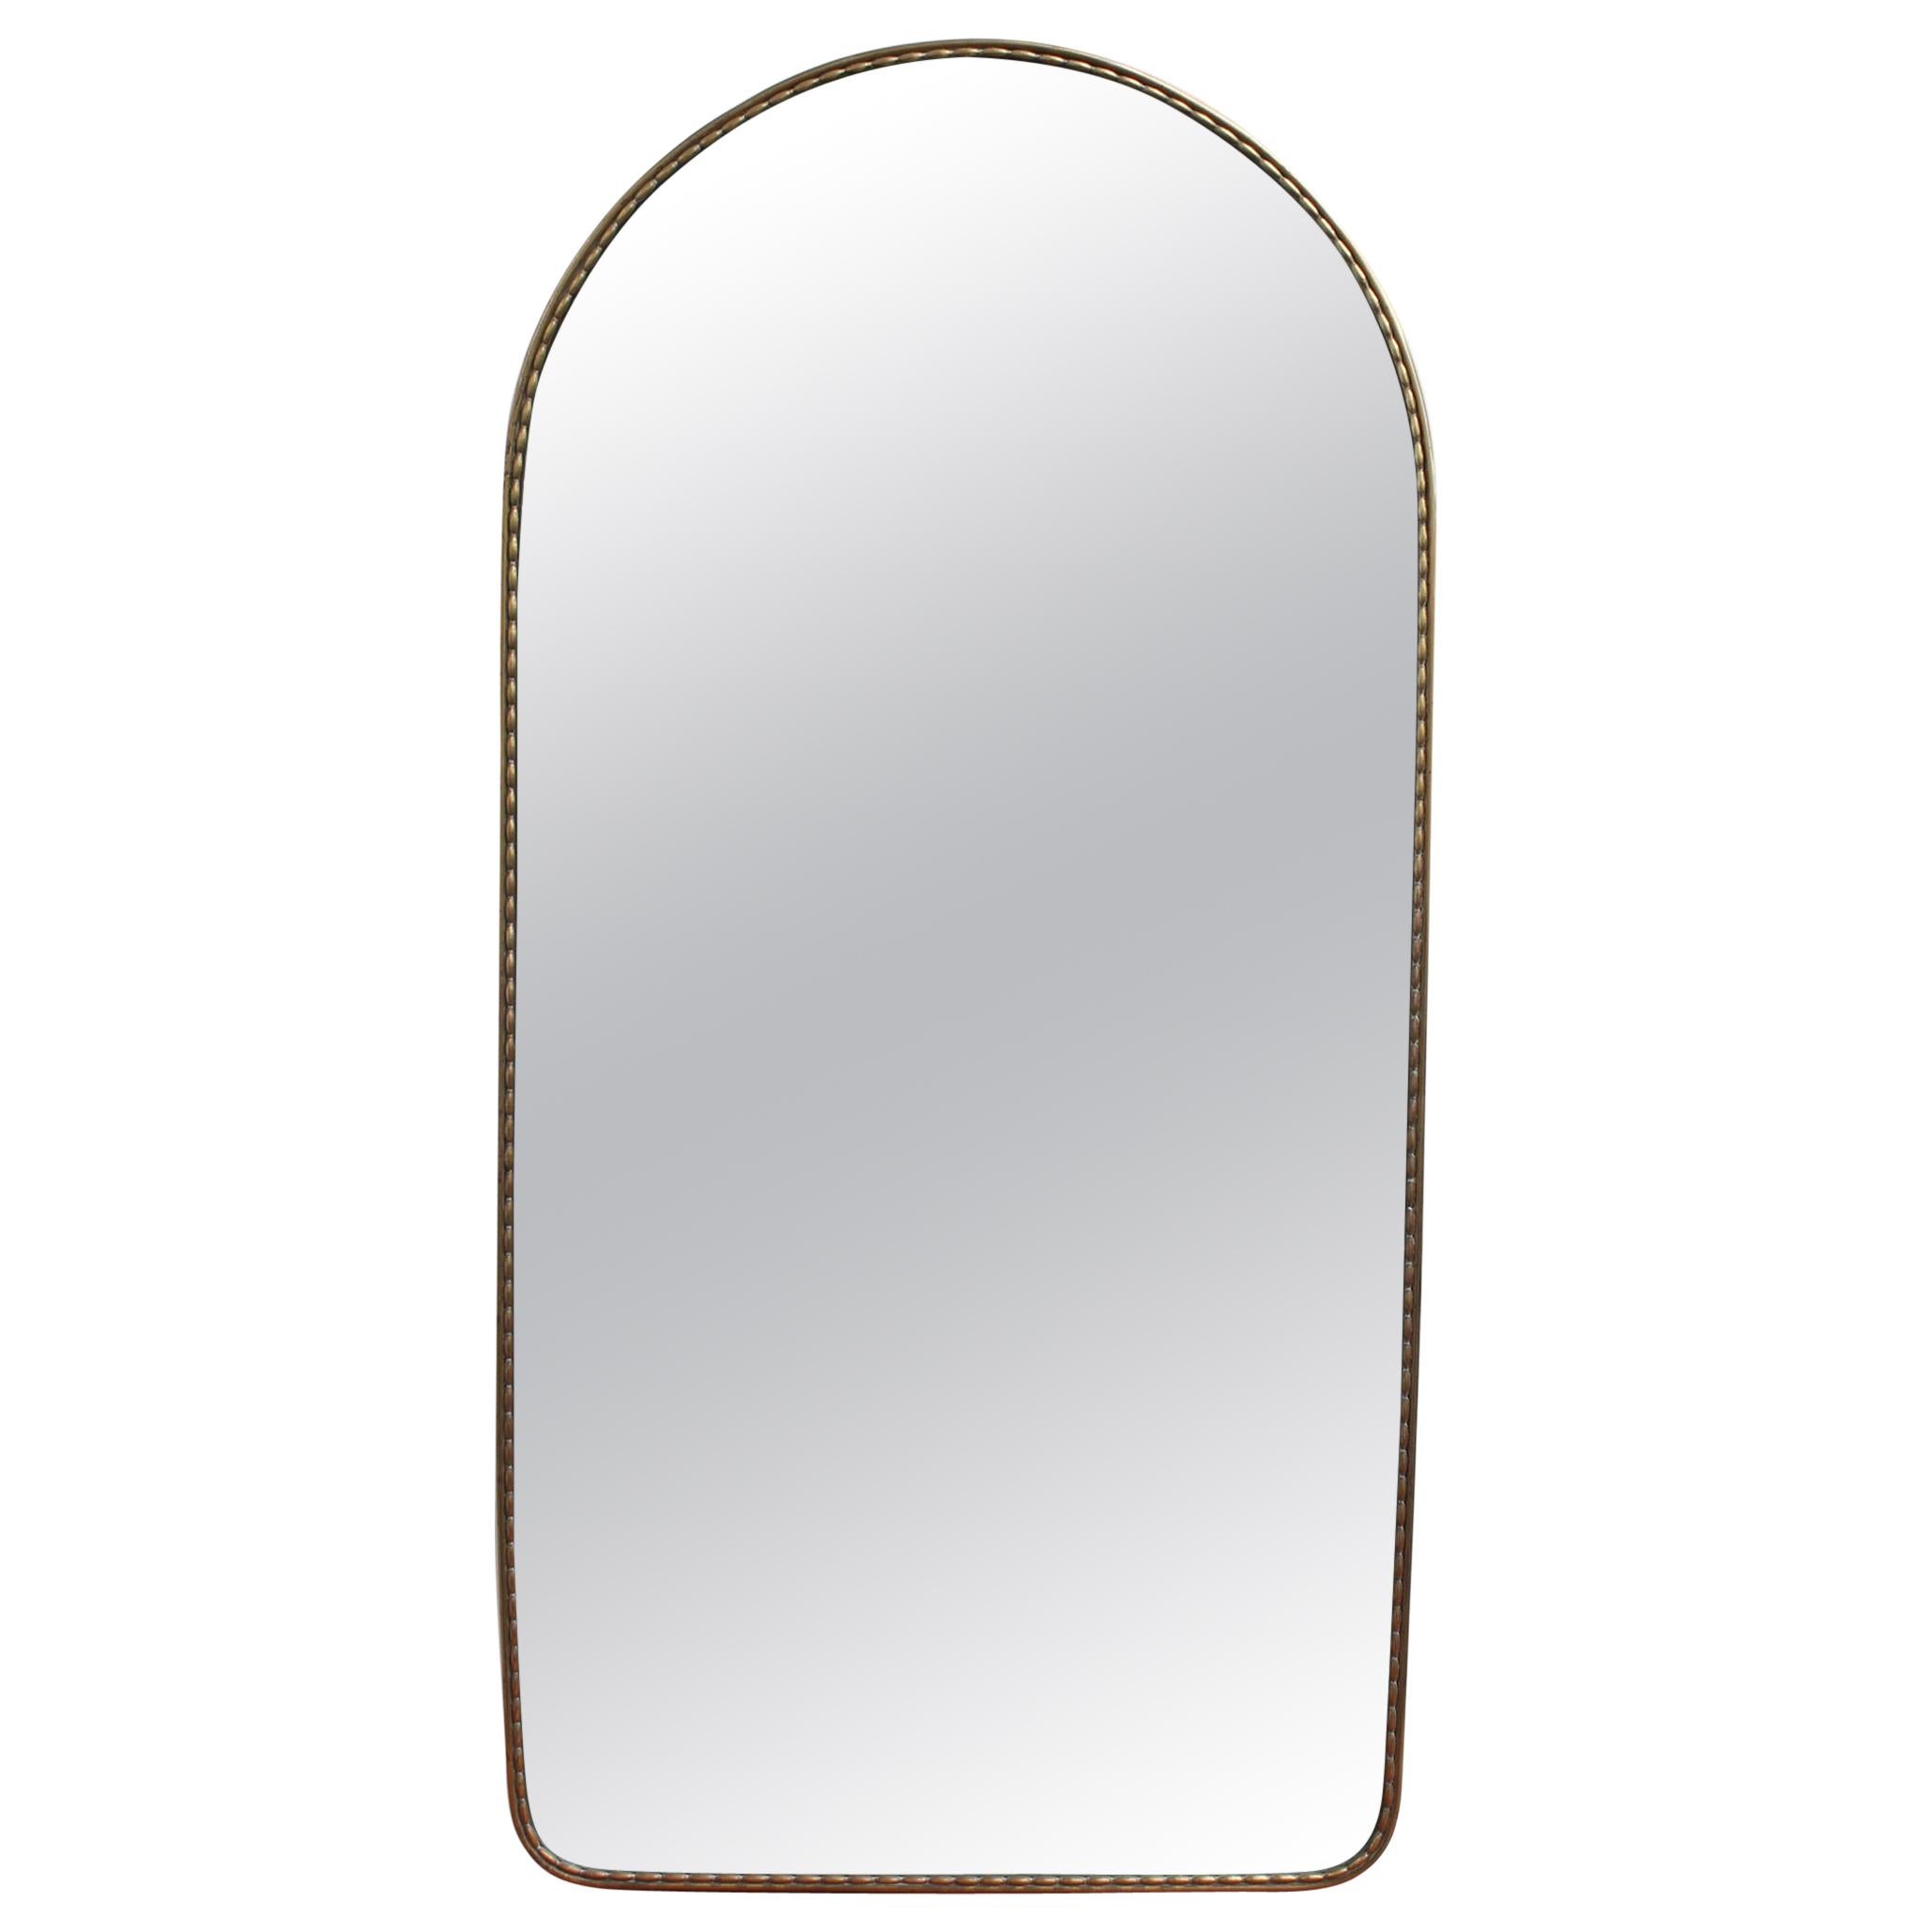 Vintage Italian Arch-Shaped Wall Mirror with Brass Frame, circa 1950s